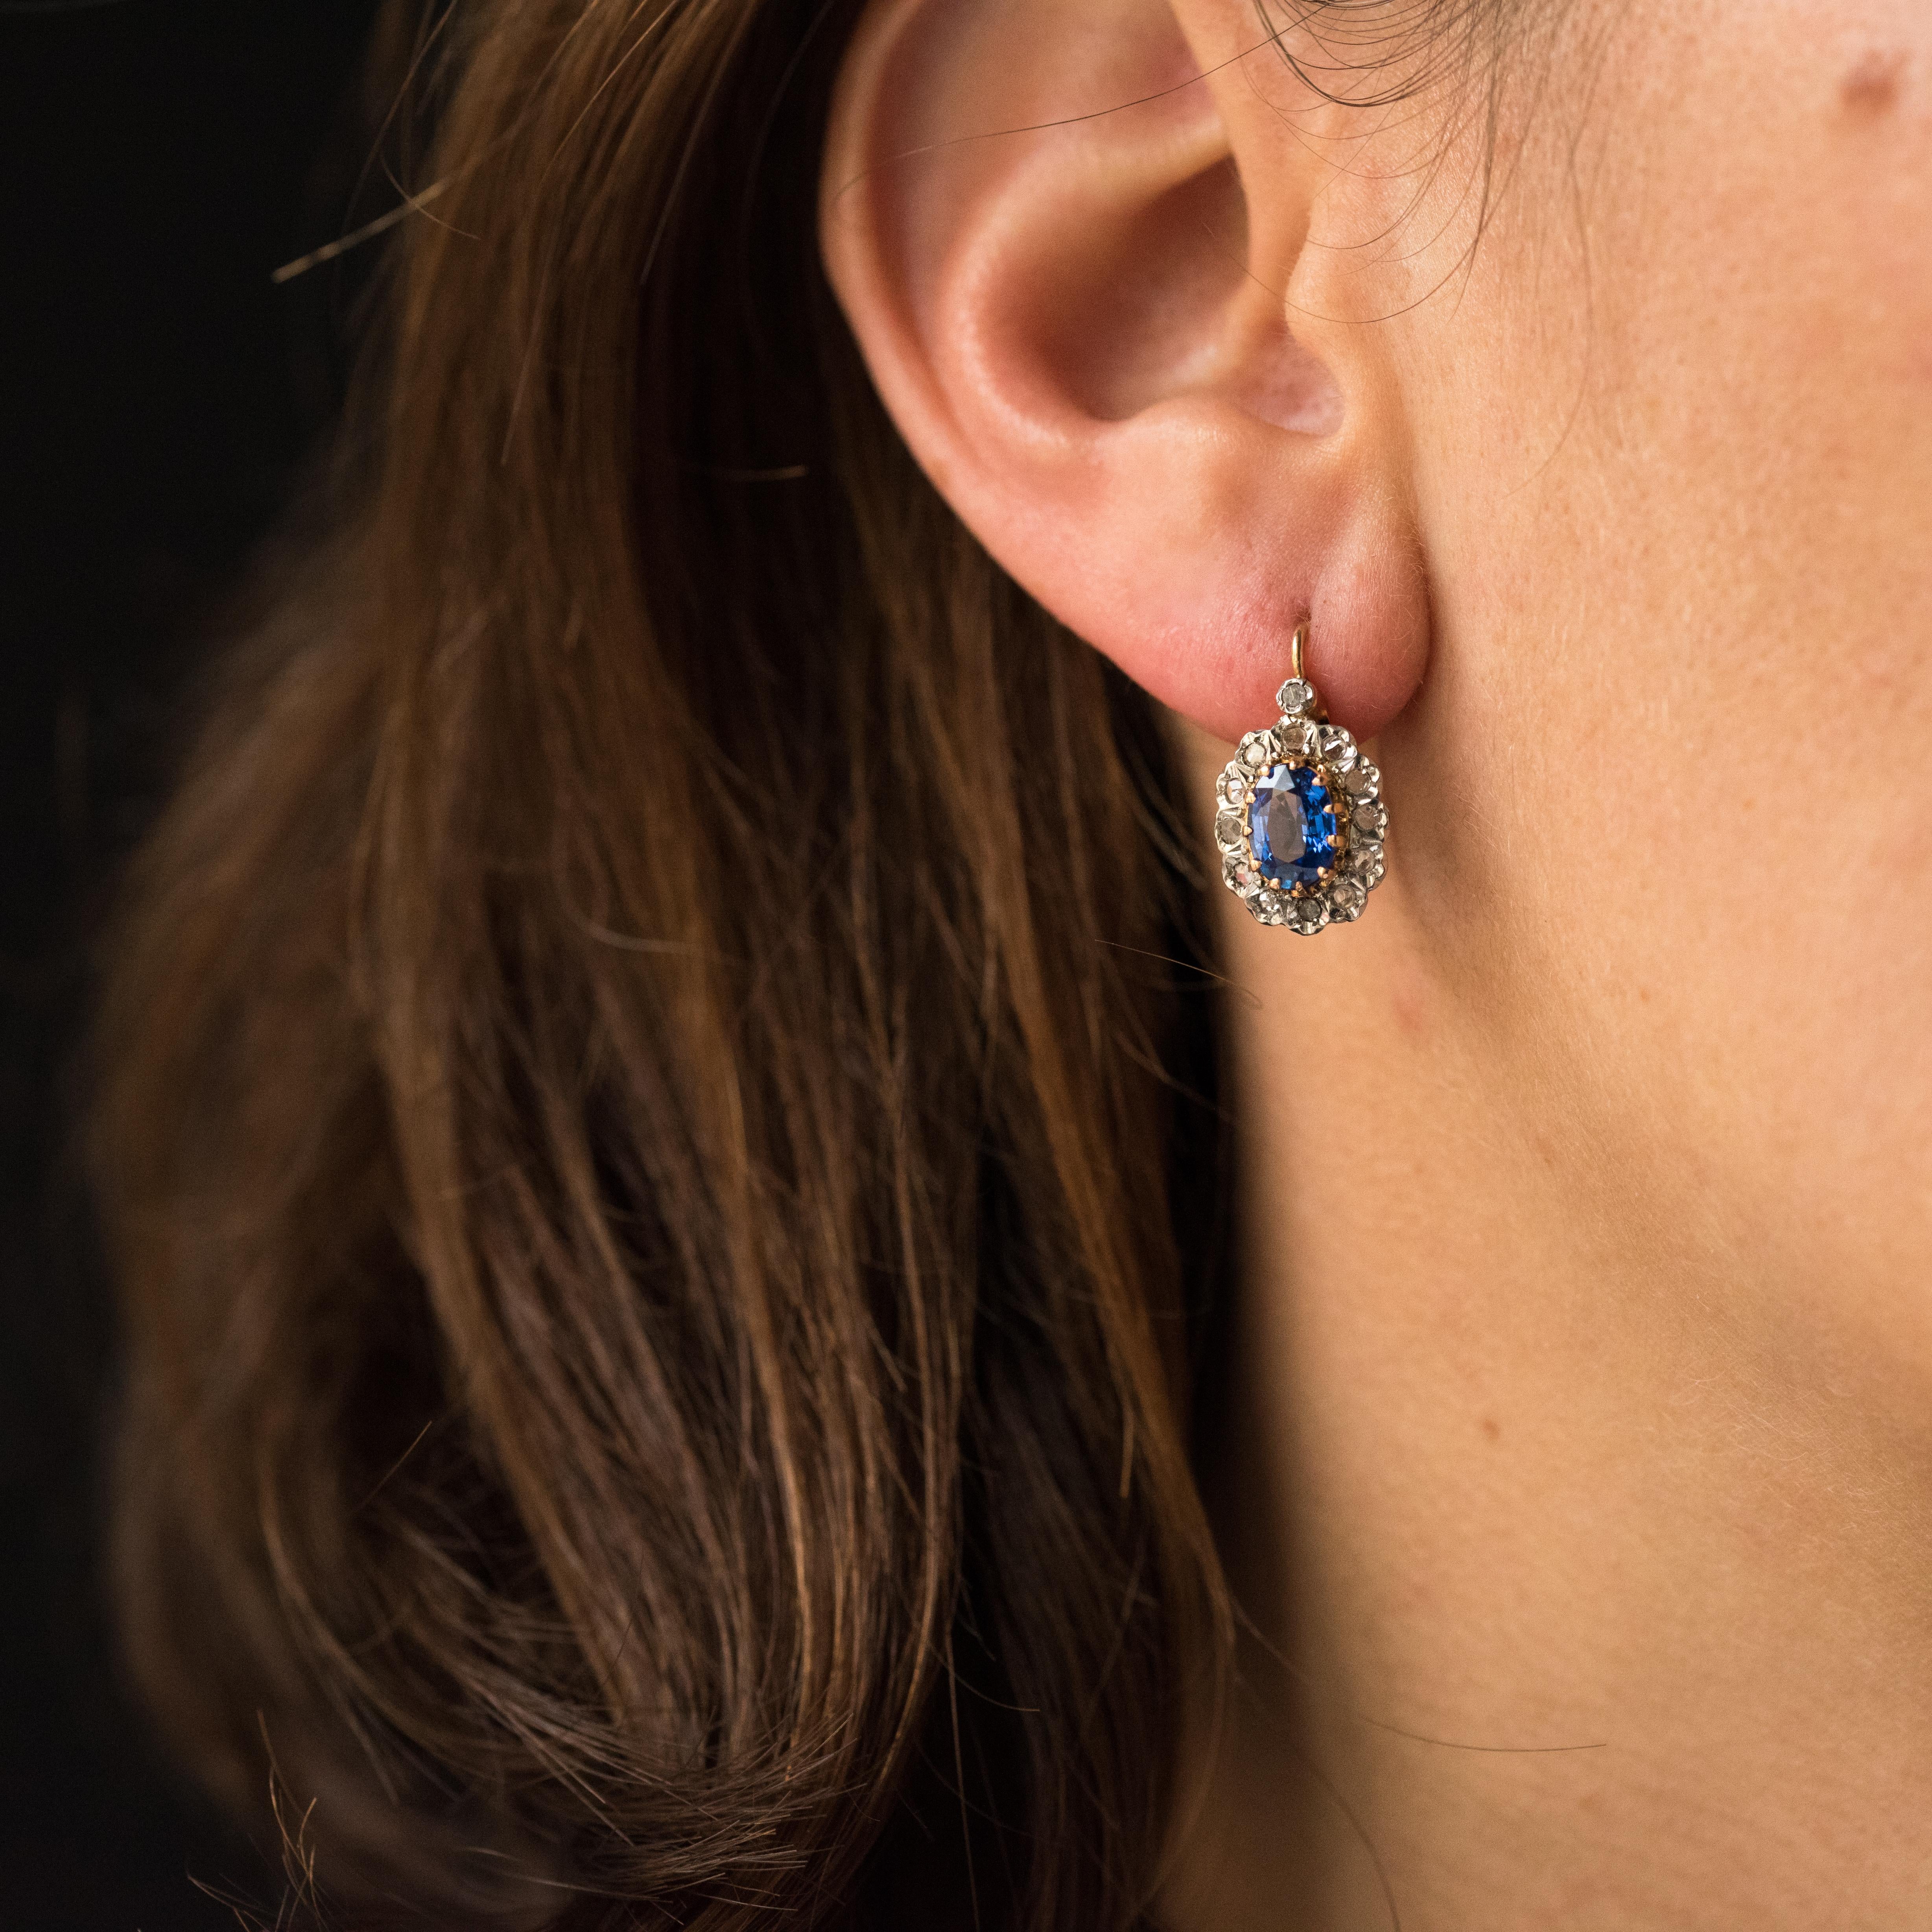 Earrings in 18 karats yellow gold earrings, eagle's head hallmark.
These earrings are composed of an oval sapphire set with claws surrounded by rose-cut diamonds. The clasp system is from the front.
Weight of sapphires: about 2 carats.
Height: 1.6